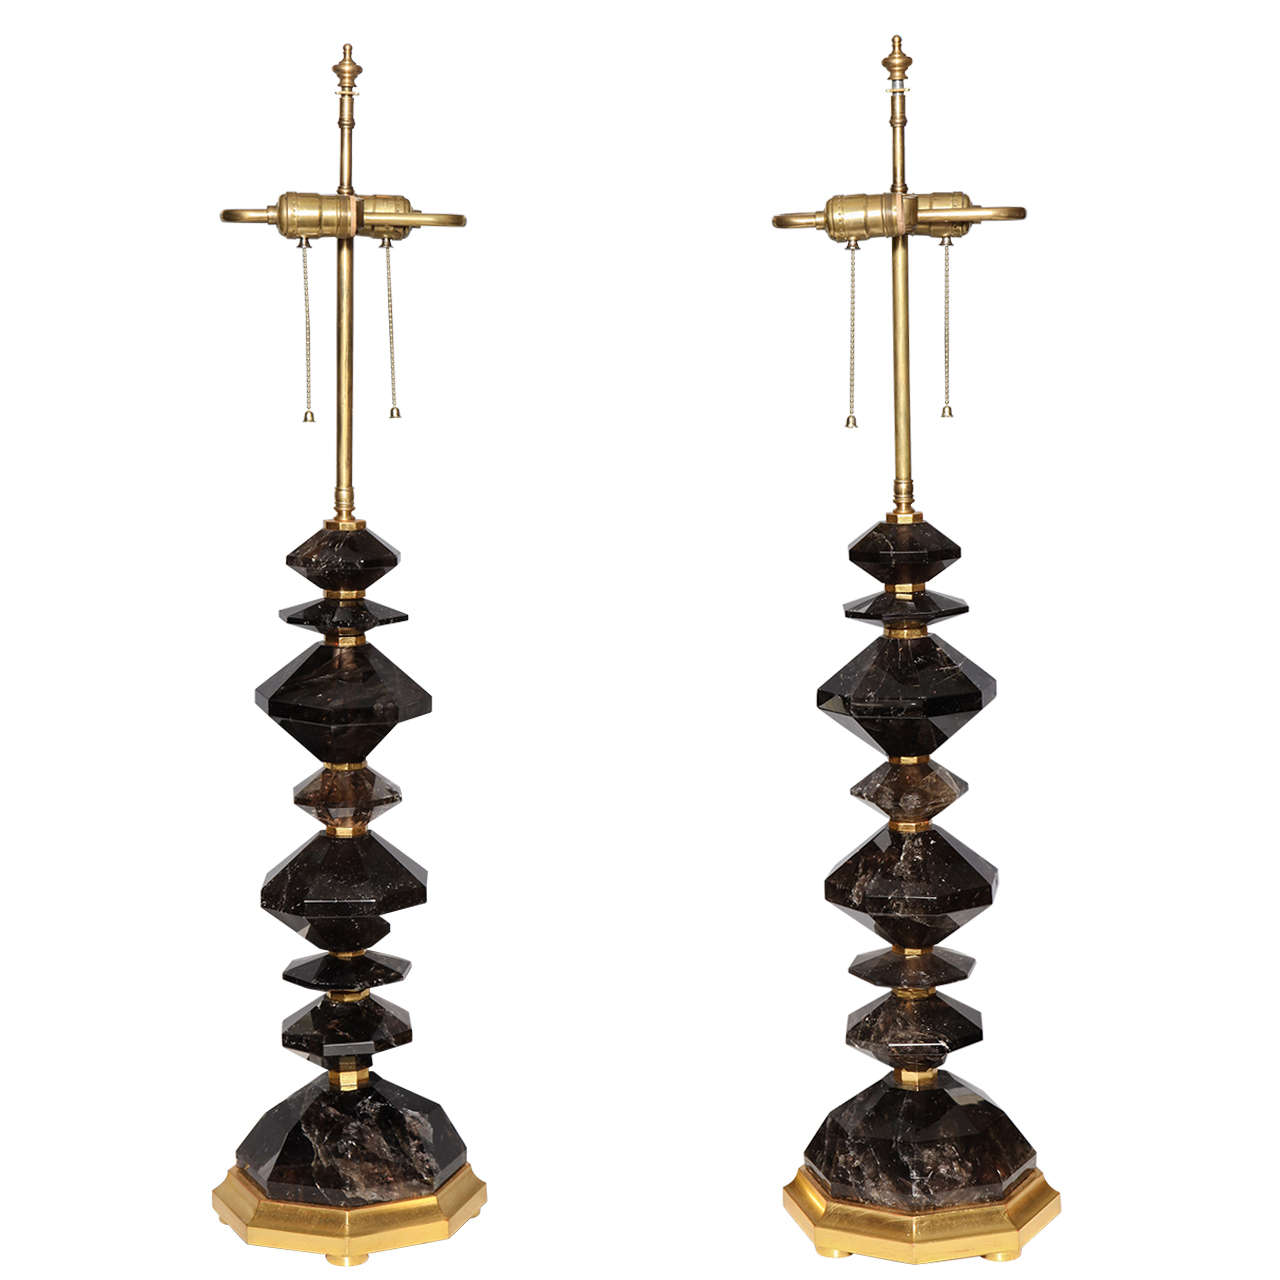 Fine Pair of Smoky Rock Crystal Quartz Table Lamps